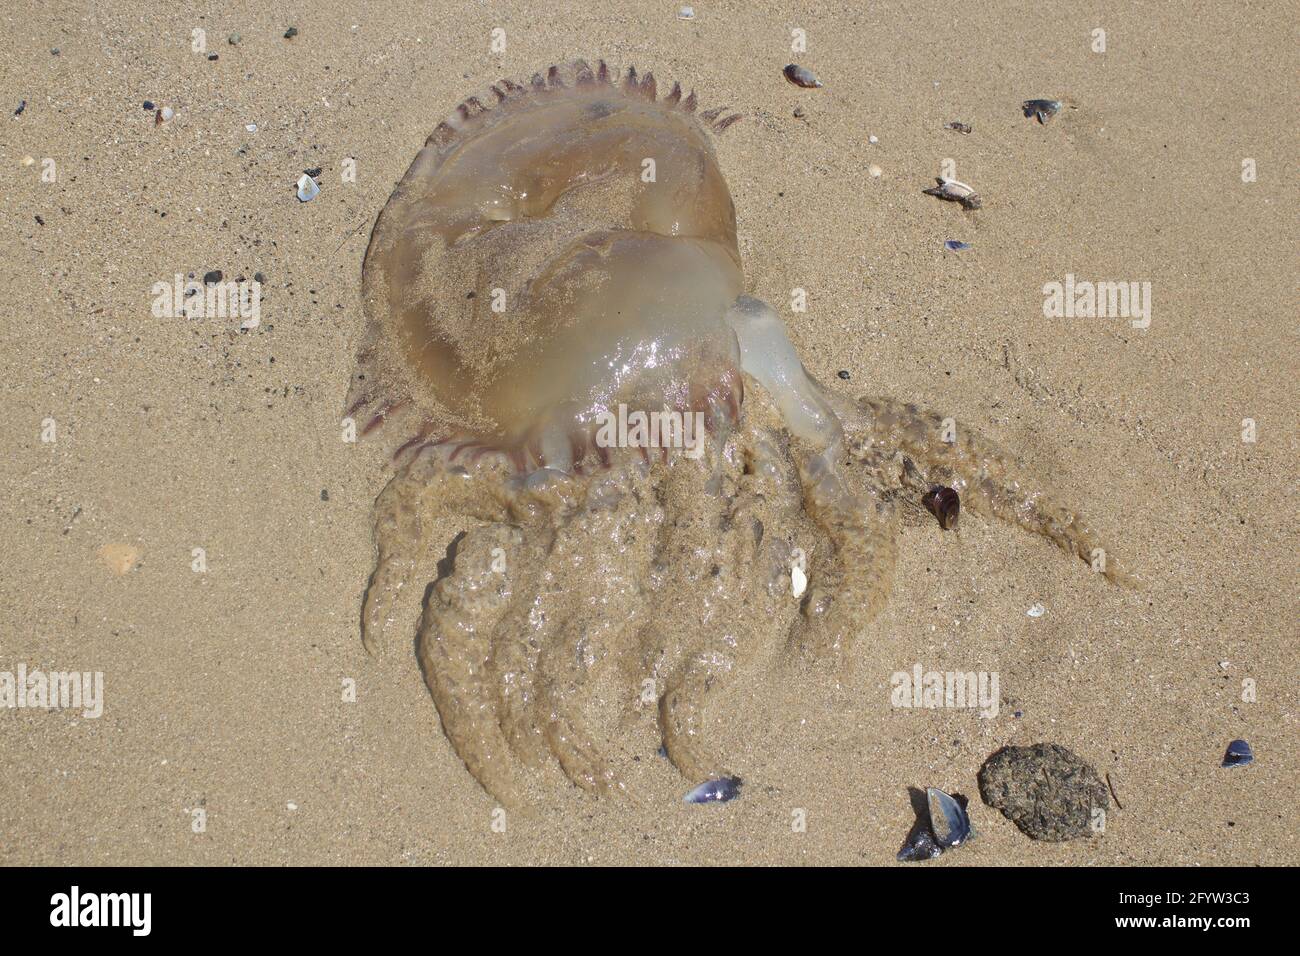 An overehad shot of a dead fire jellyfish on the sandy beach in the sand Stock Photo